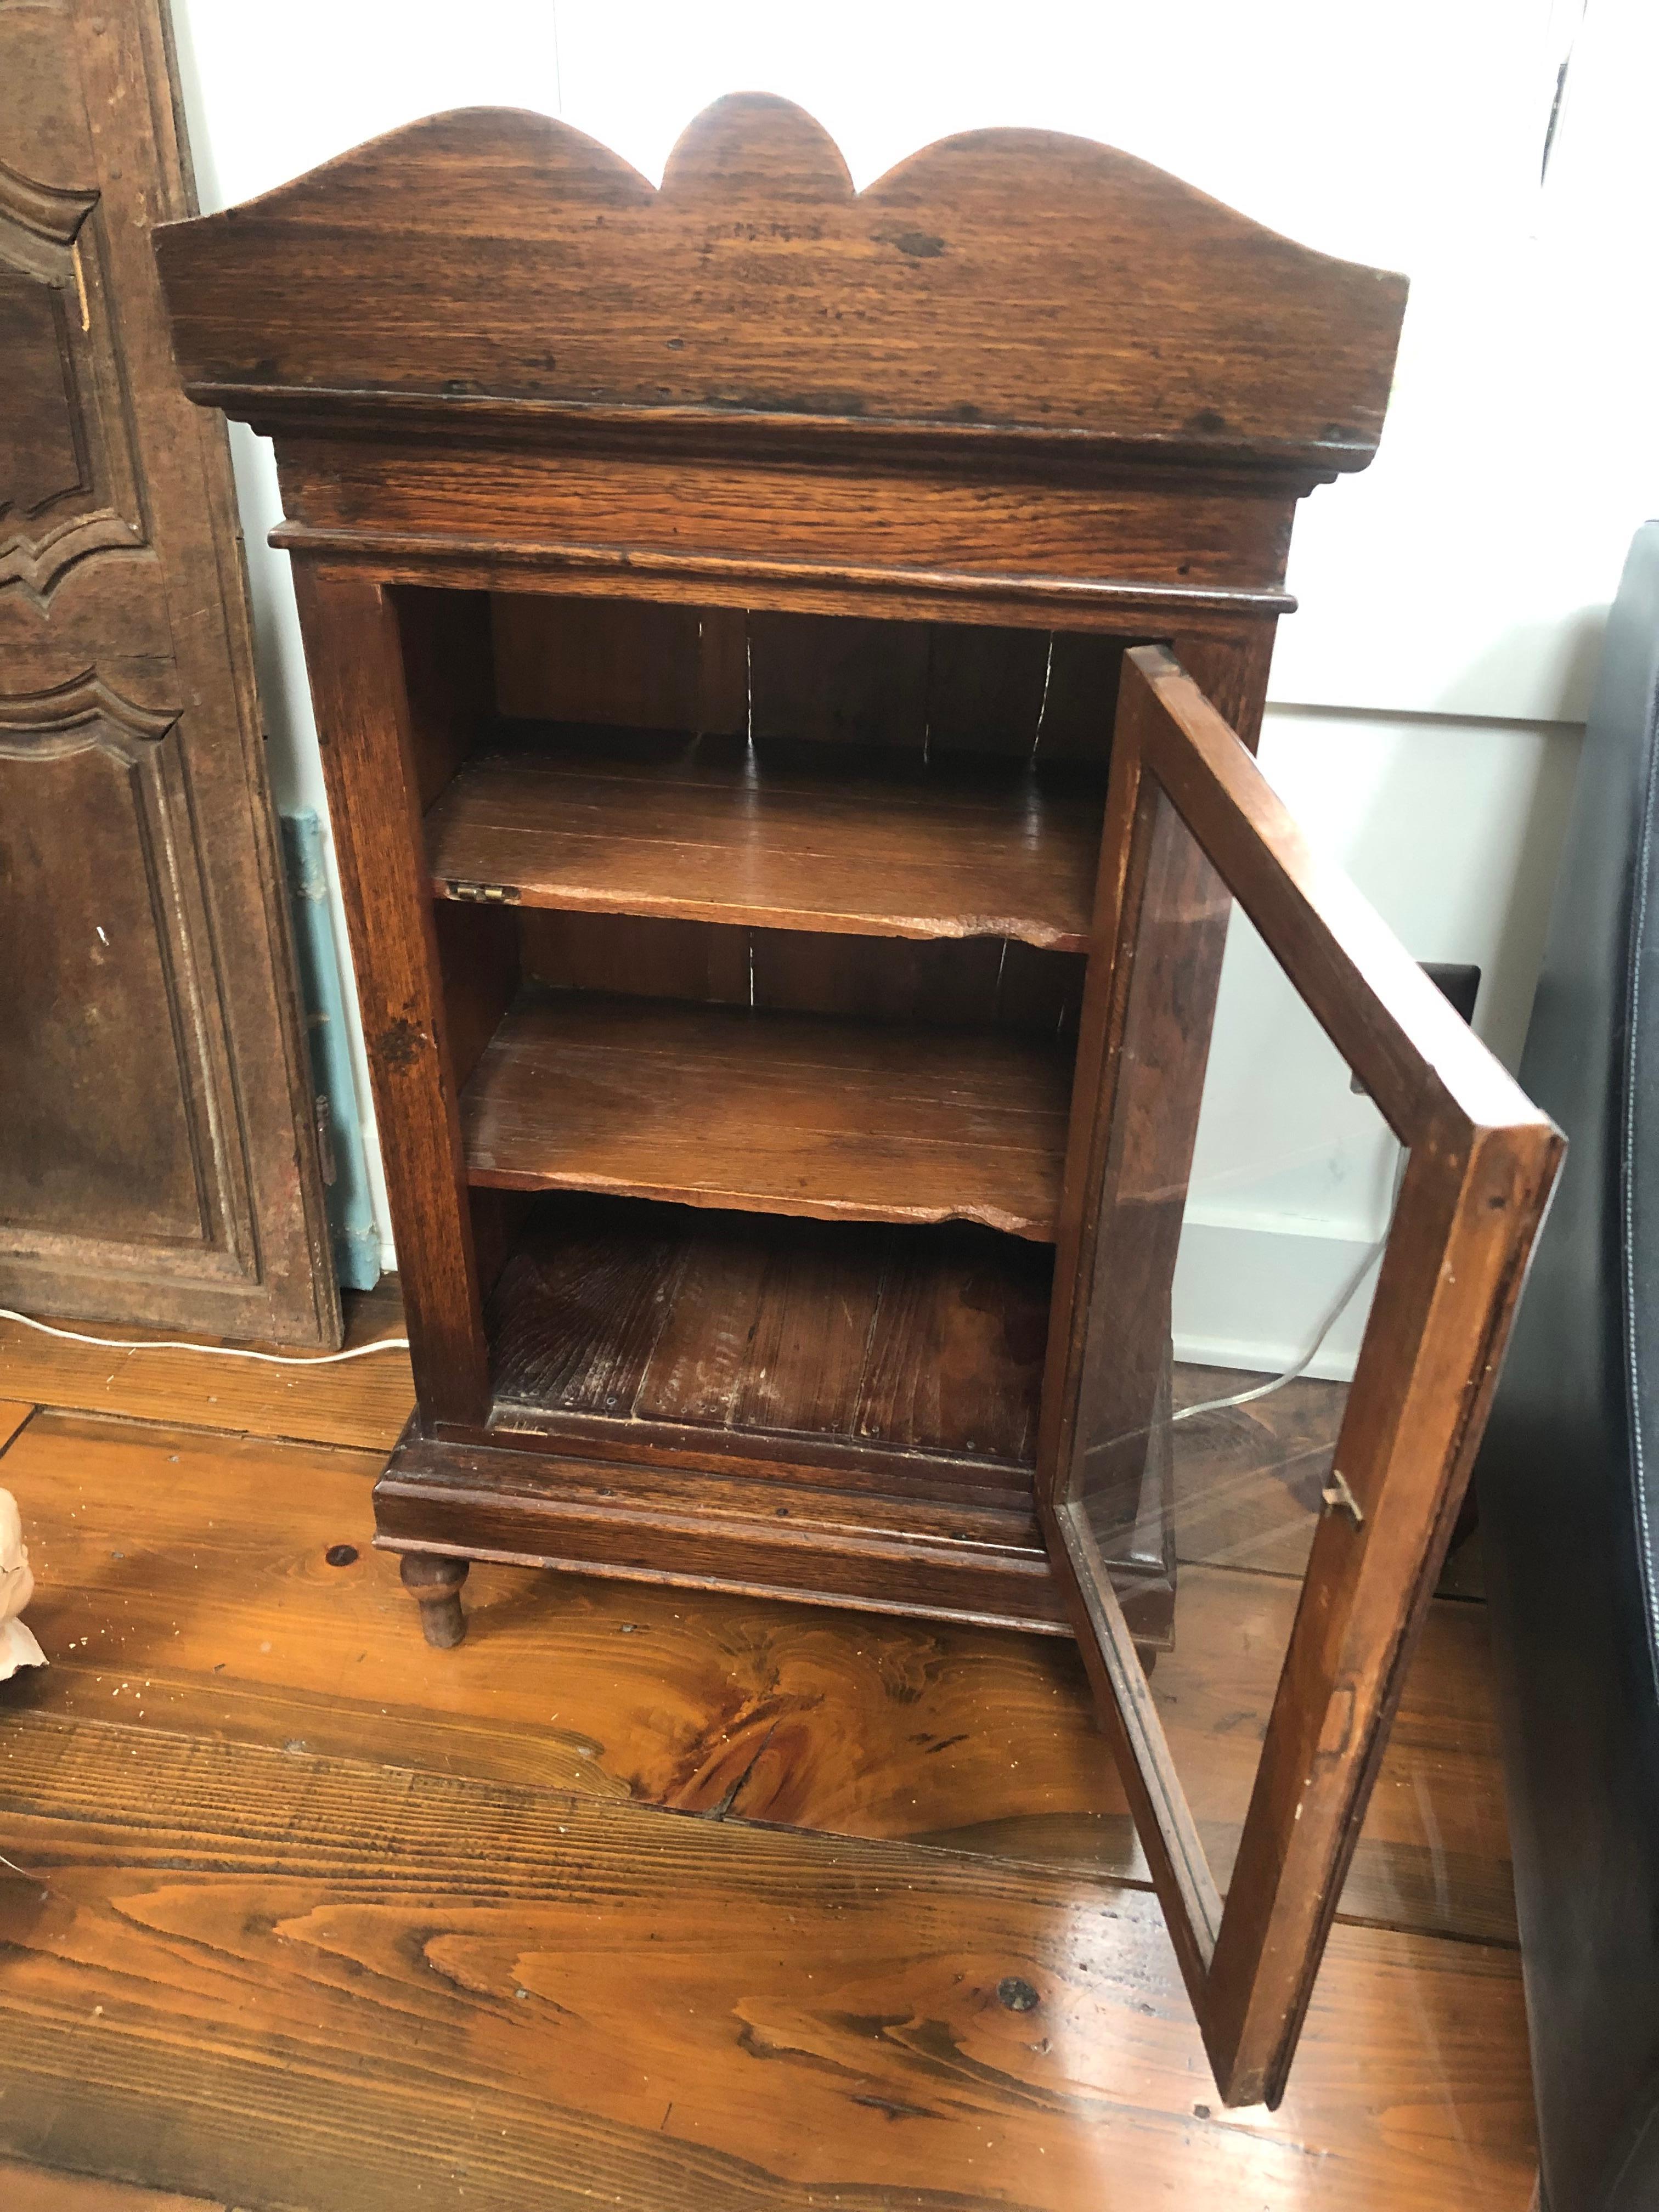 A charming medium sized antique mahogany curio cabinet on four turned feet having handsome decorative top cornice and original glass. The door opens to reveal 3 shelves. The cabinet at one time illuminated inside as the wiring reflects, but hasn't